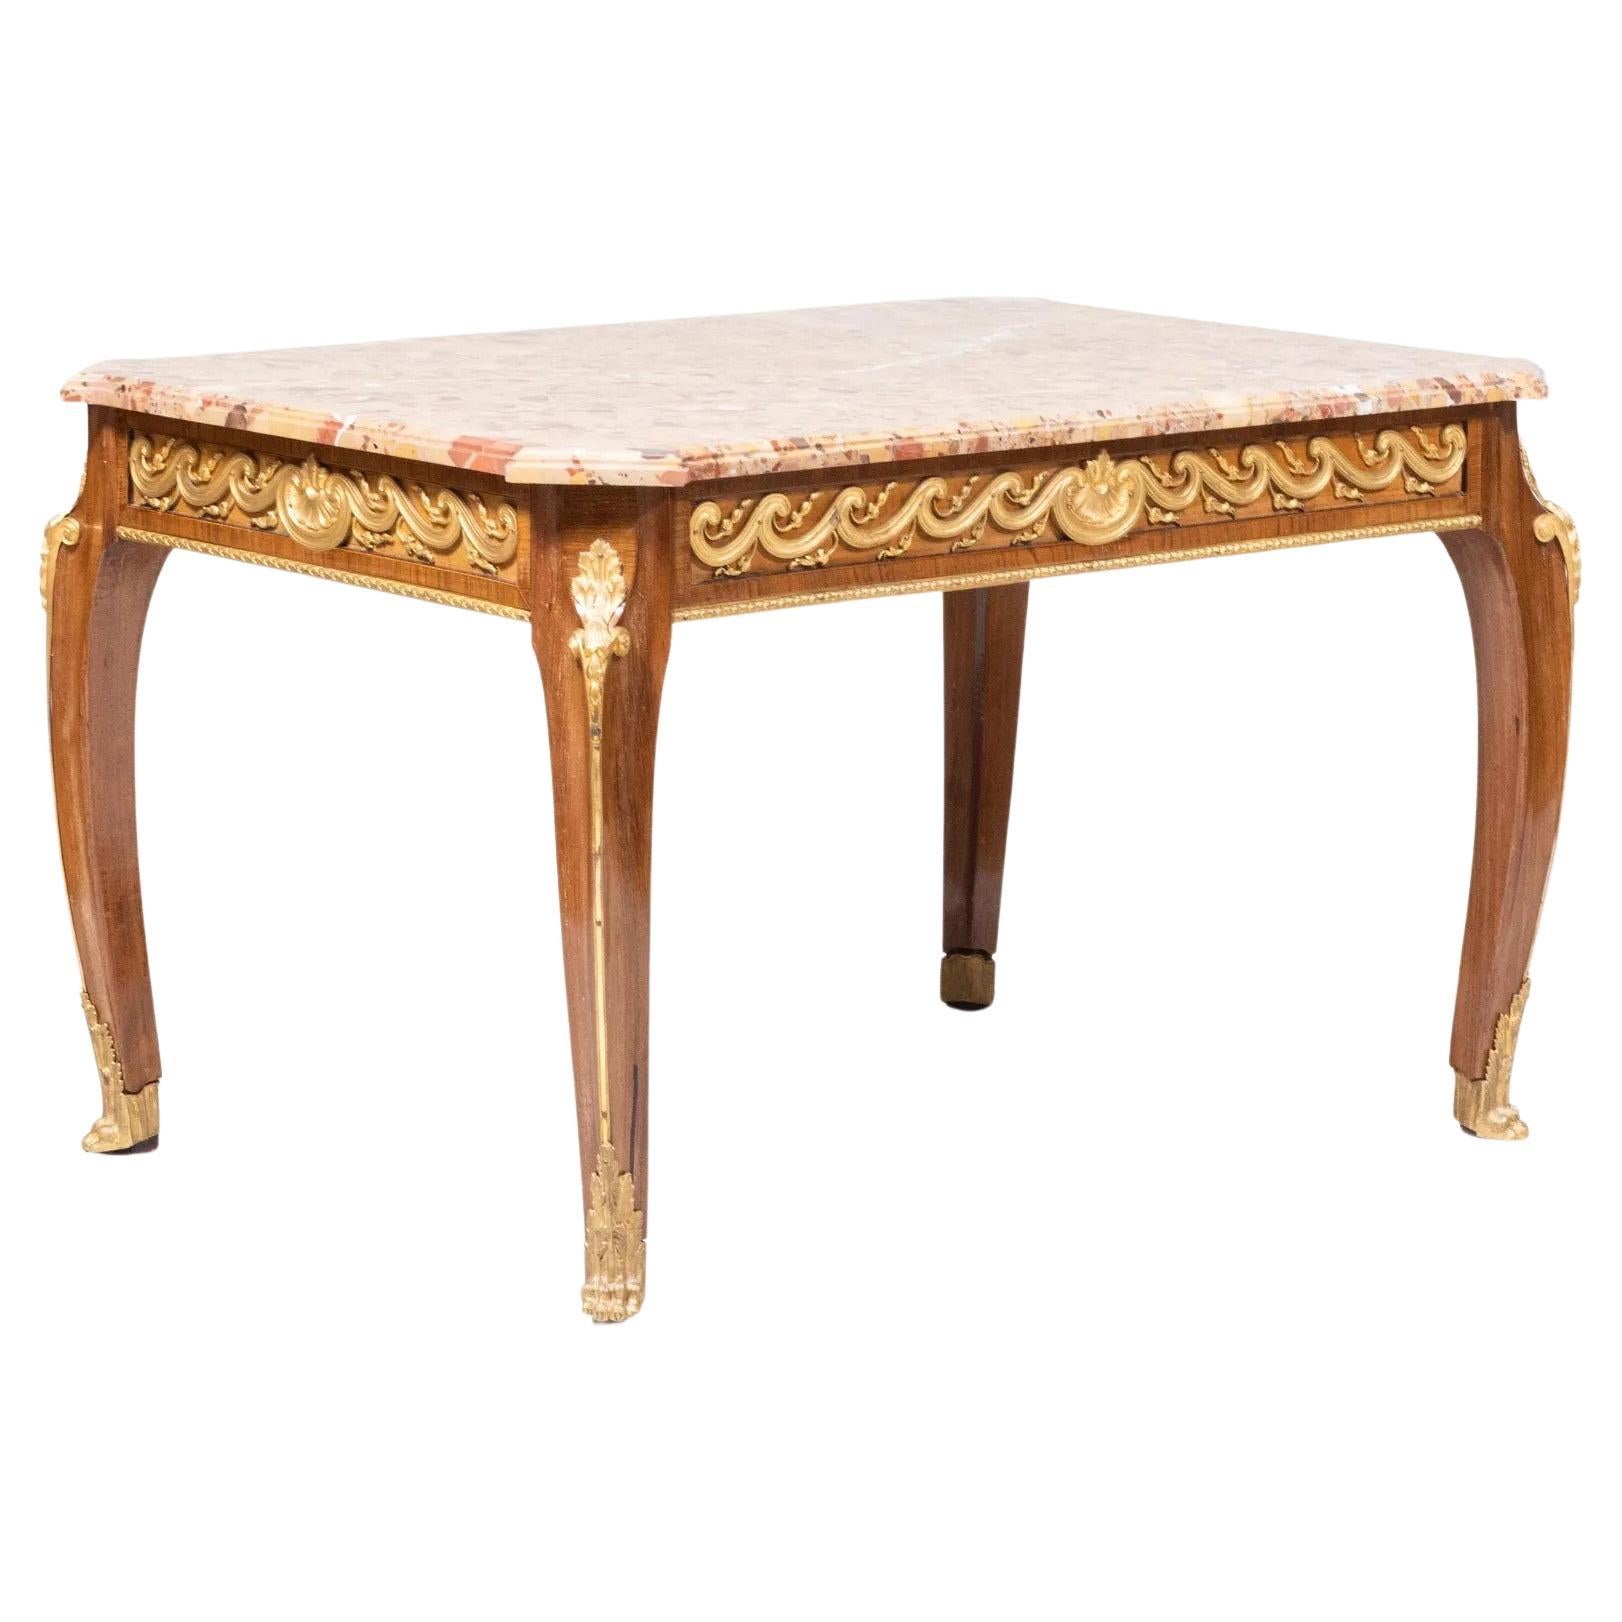 French Louis XVI Style Ormolu-Mounted Mahogany Coffee Table, C. 1880 For Sale